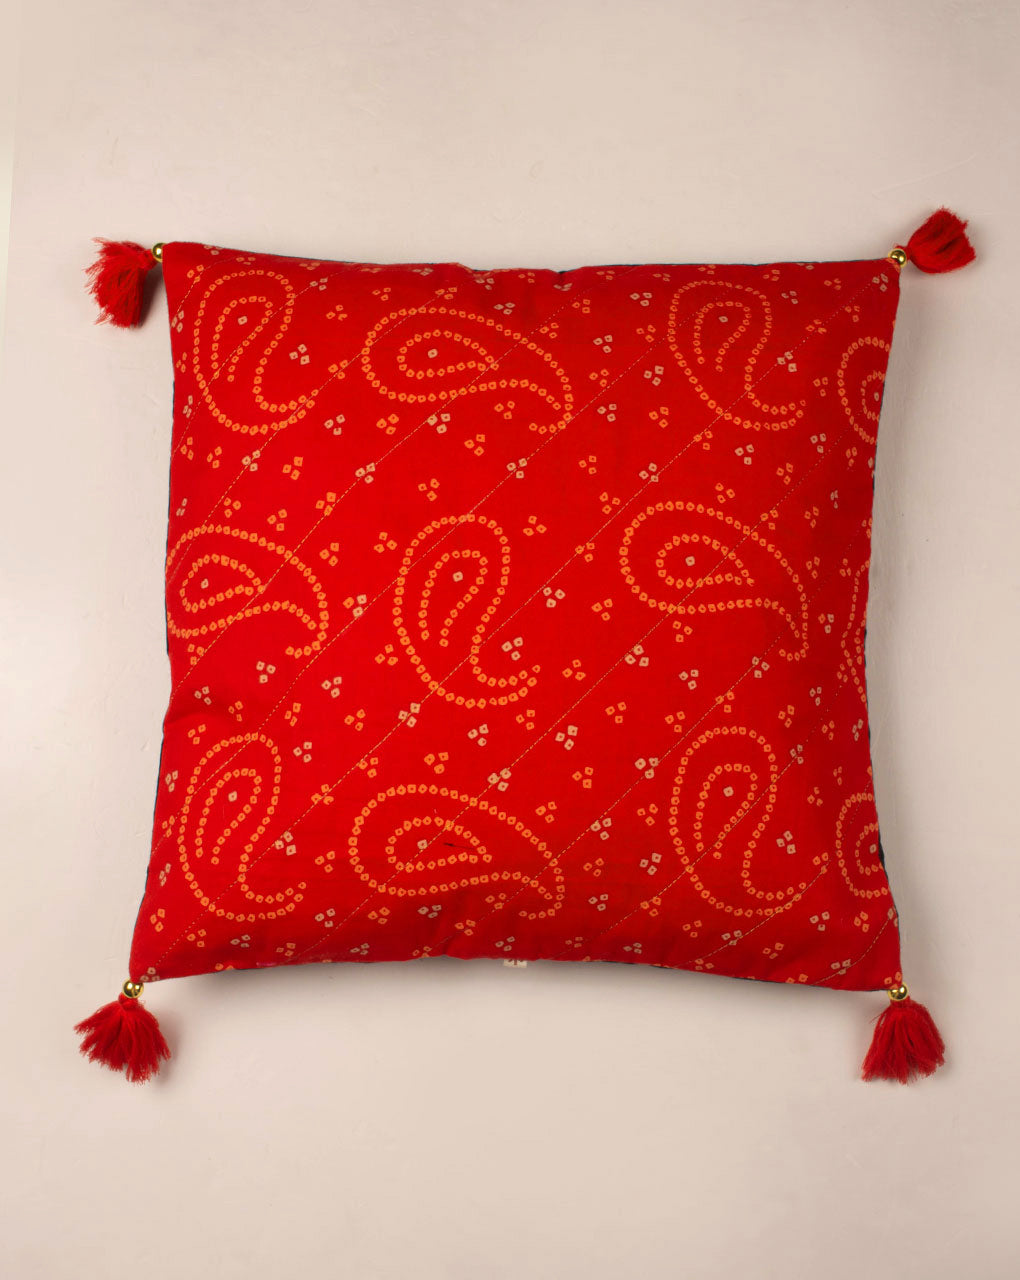 Hand Crafted Coton Cushion Cover ( 16X16 Inches ) - Fabriclore.com